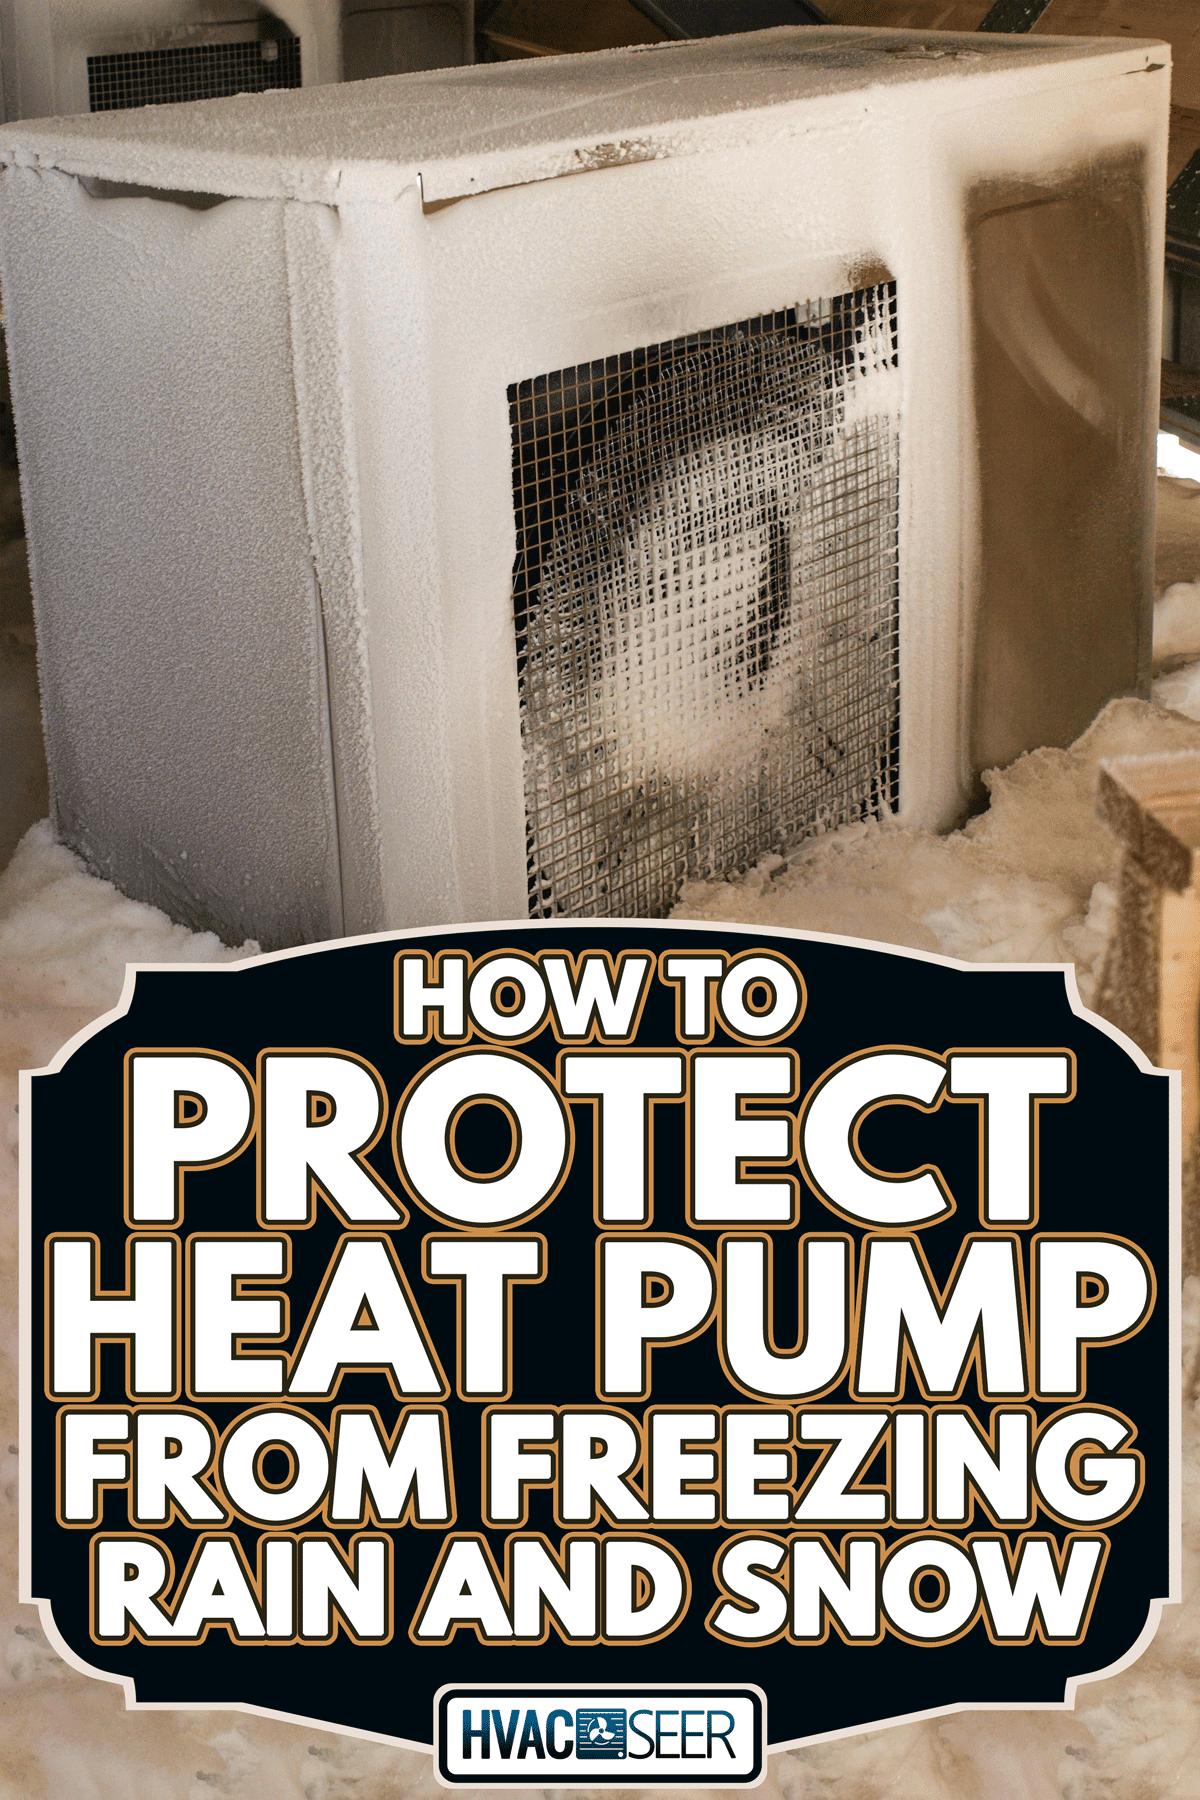 Frozen heat pump on the back of the house, How To Protect Heat Pump From Freezing Rain And Snow